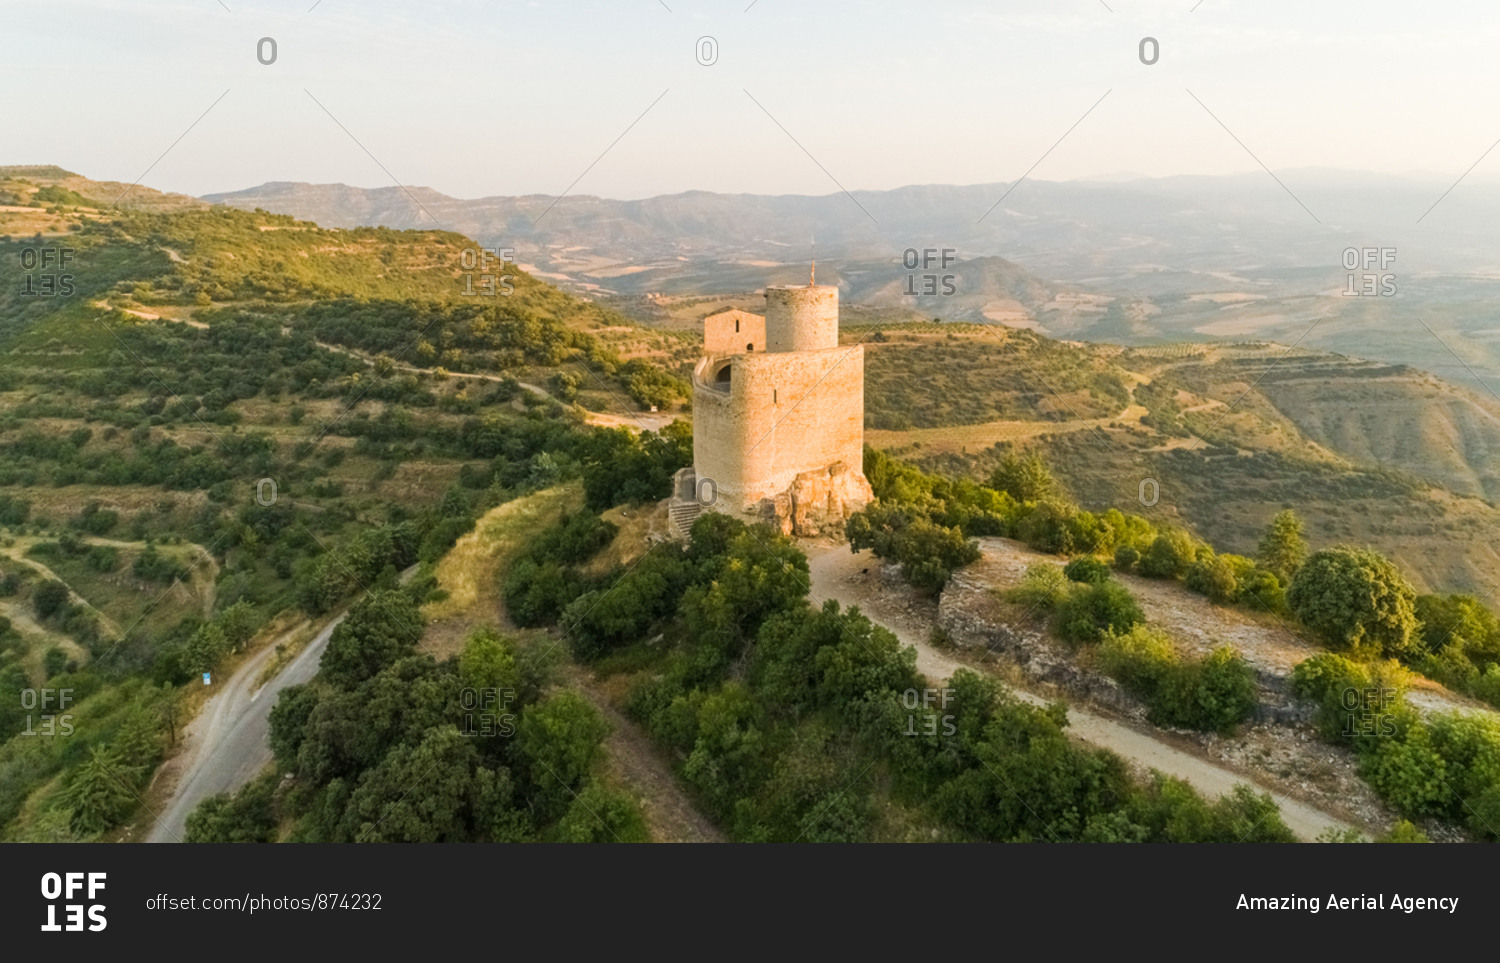 Aerial view of Castell de Mur touristic attraction during the sunset, Spain.